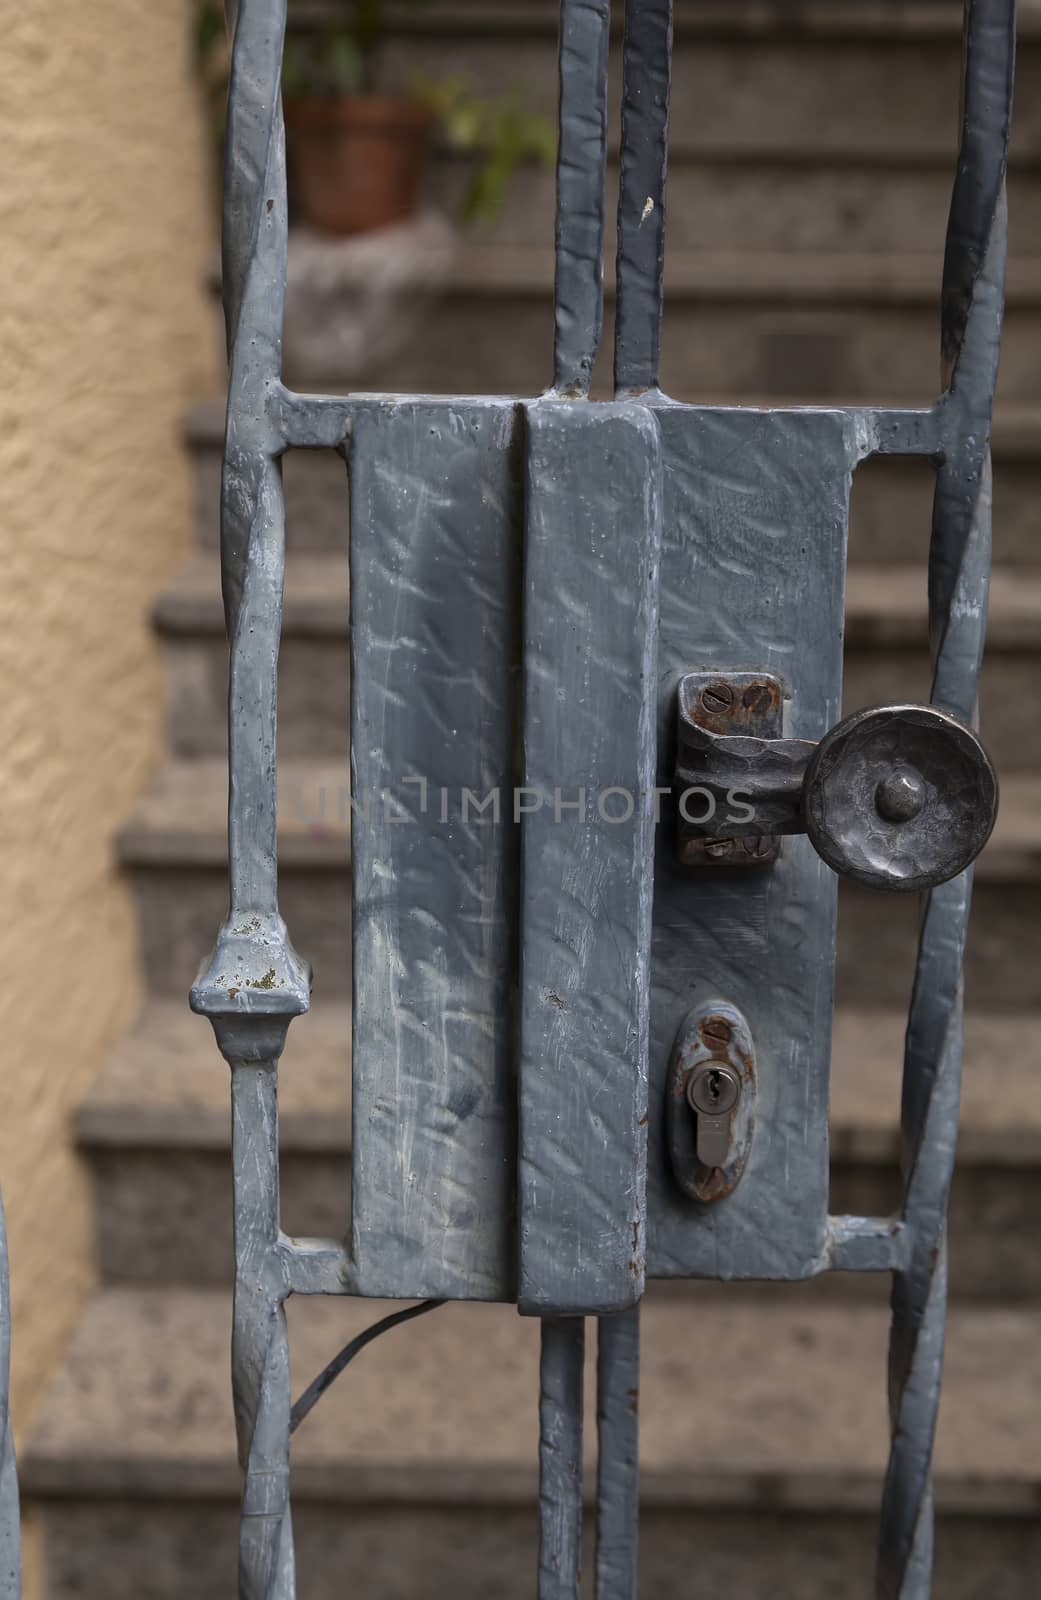 An old lock on a gate to a staircase